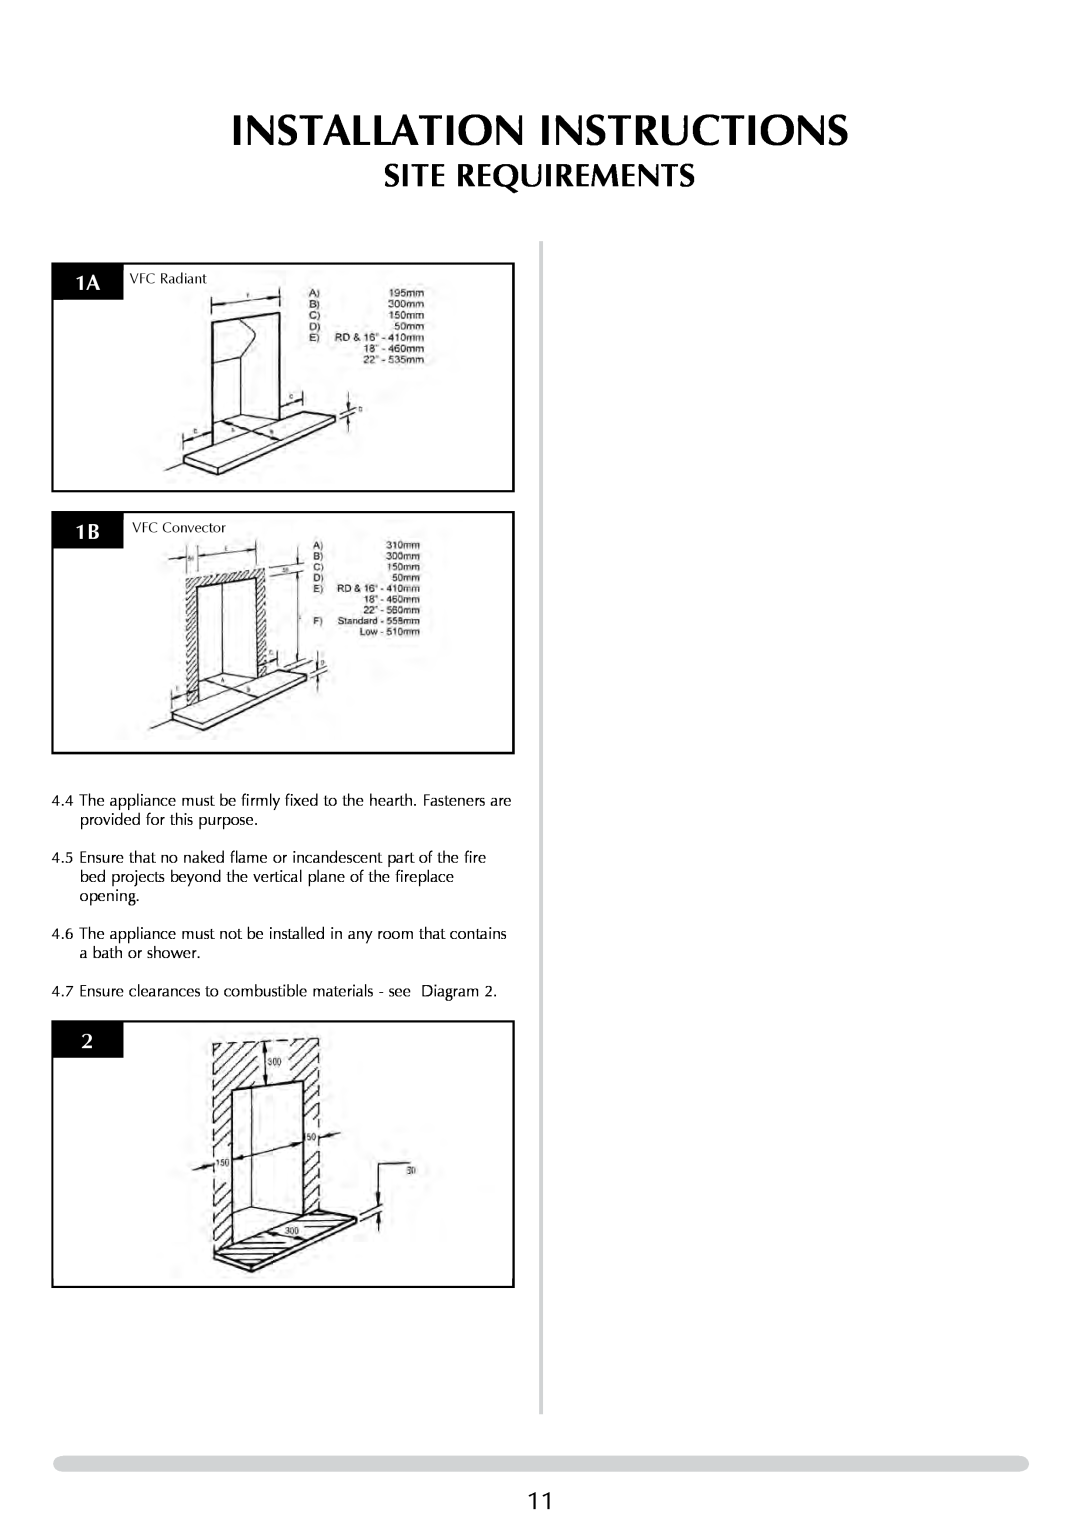 Stovax 8455 manual Installation Instructions, Site Requirements, 1A VFC Radiant 1B VFC Convector 